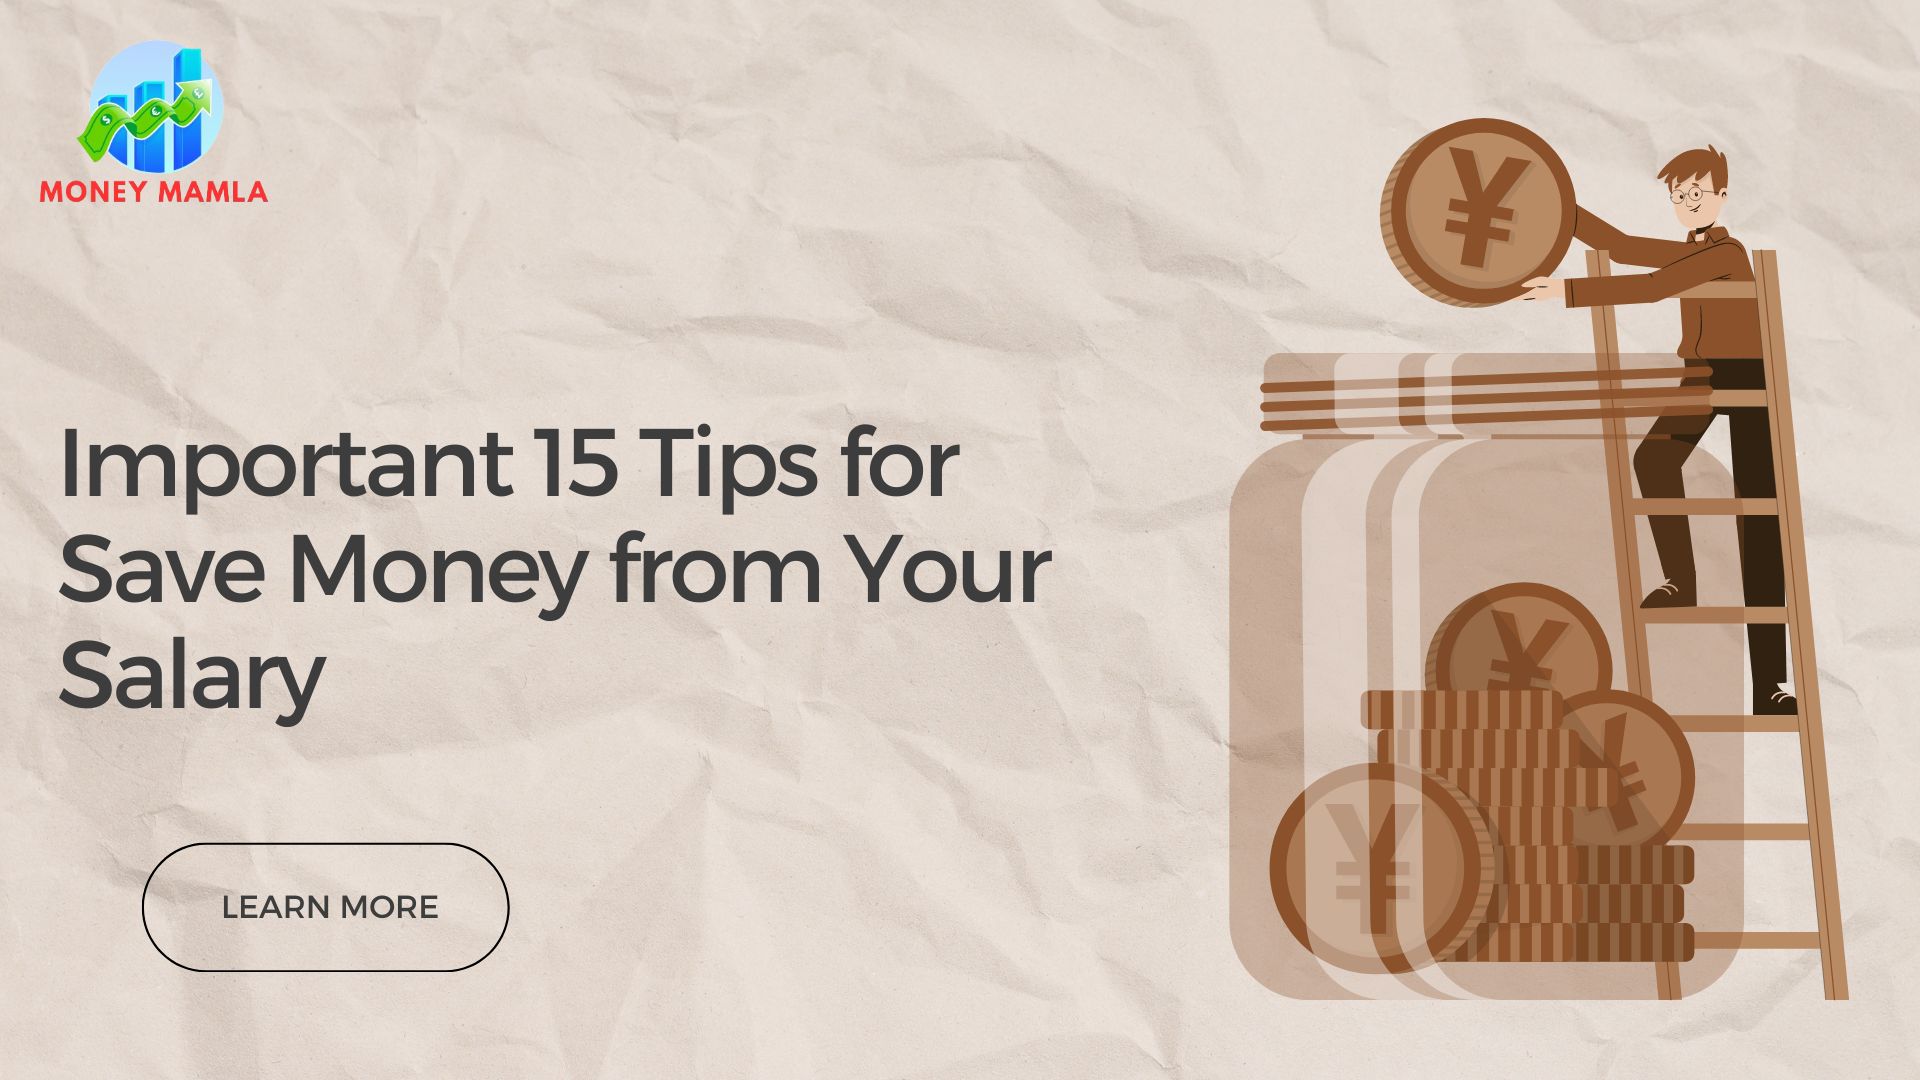 Important 15 Tips for Save Money from Your Salary